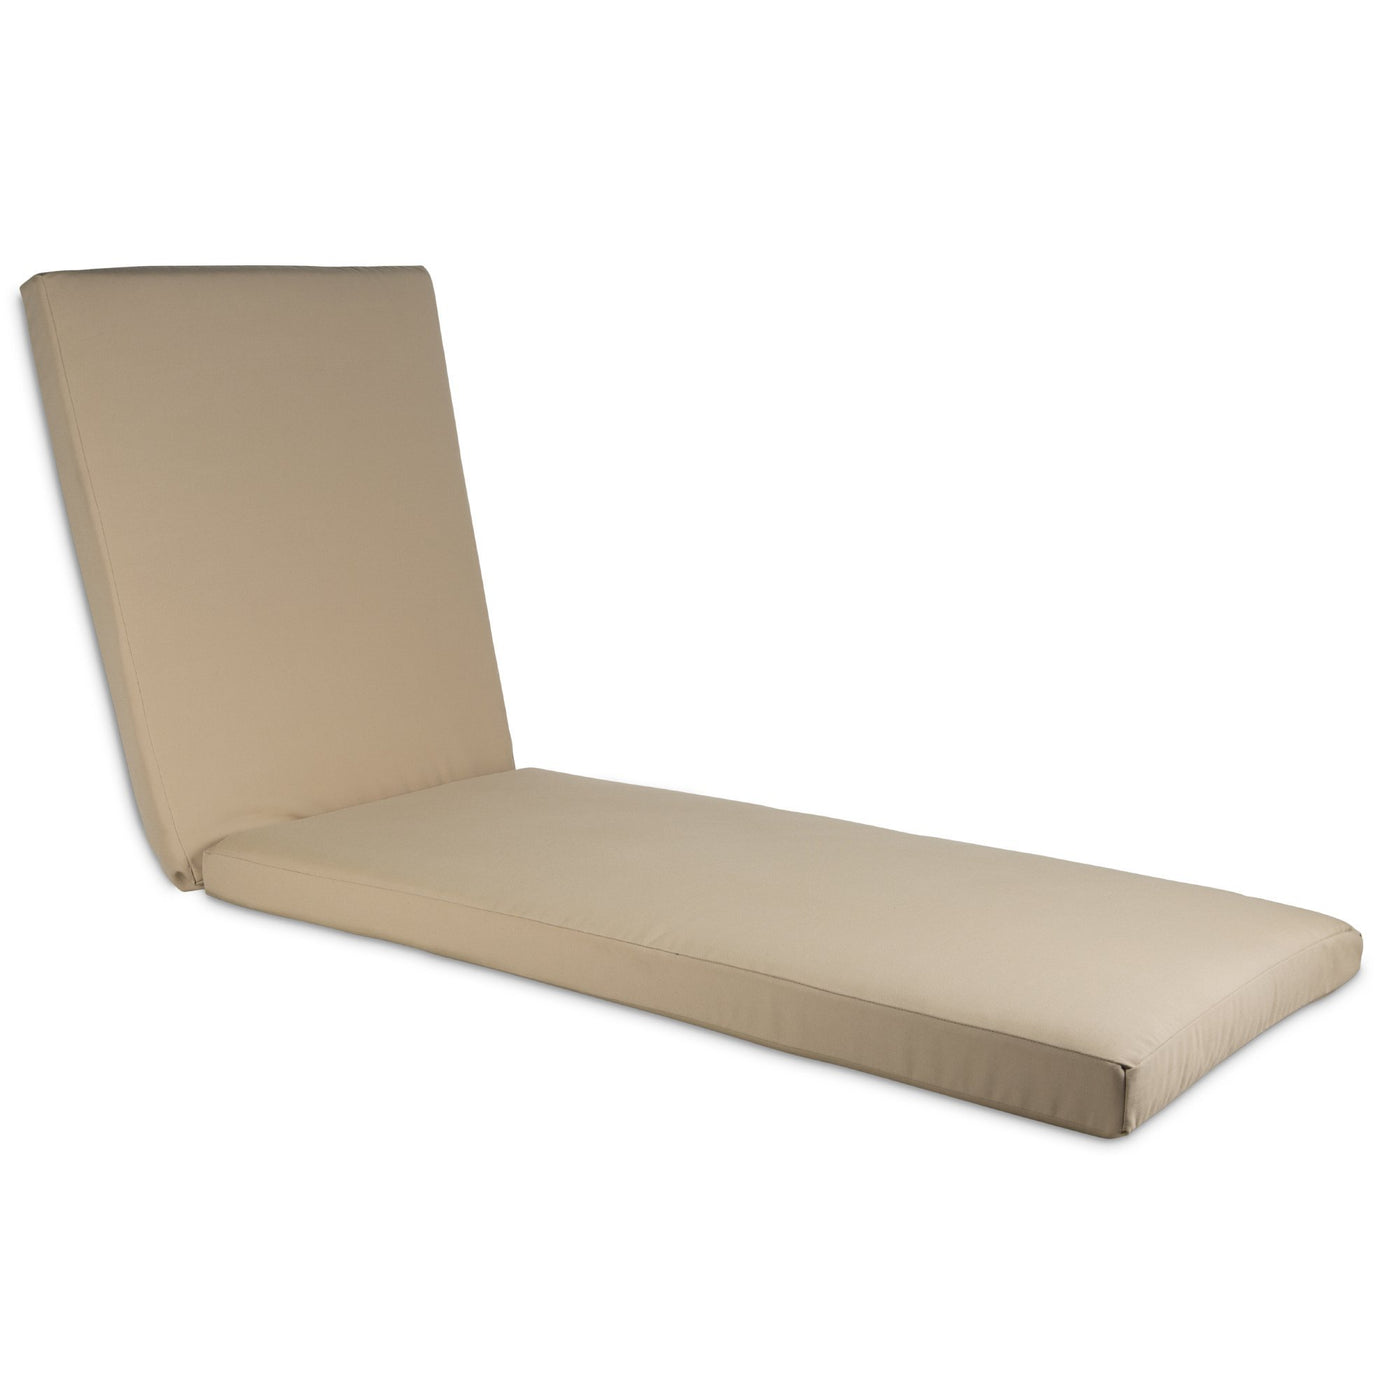 CLOSEOUT Chaise Lounge 77 x 24 x 3 Water Resistant Outdoor Hinged Cushion Highwood USA Driftwood 